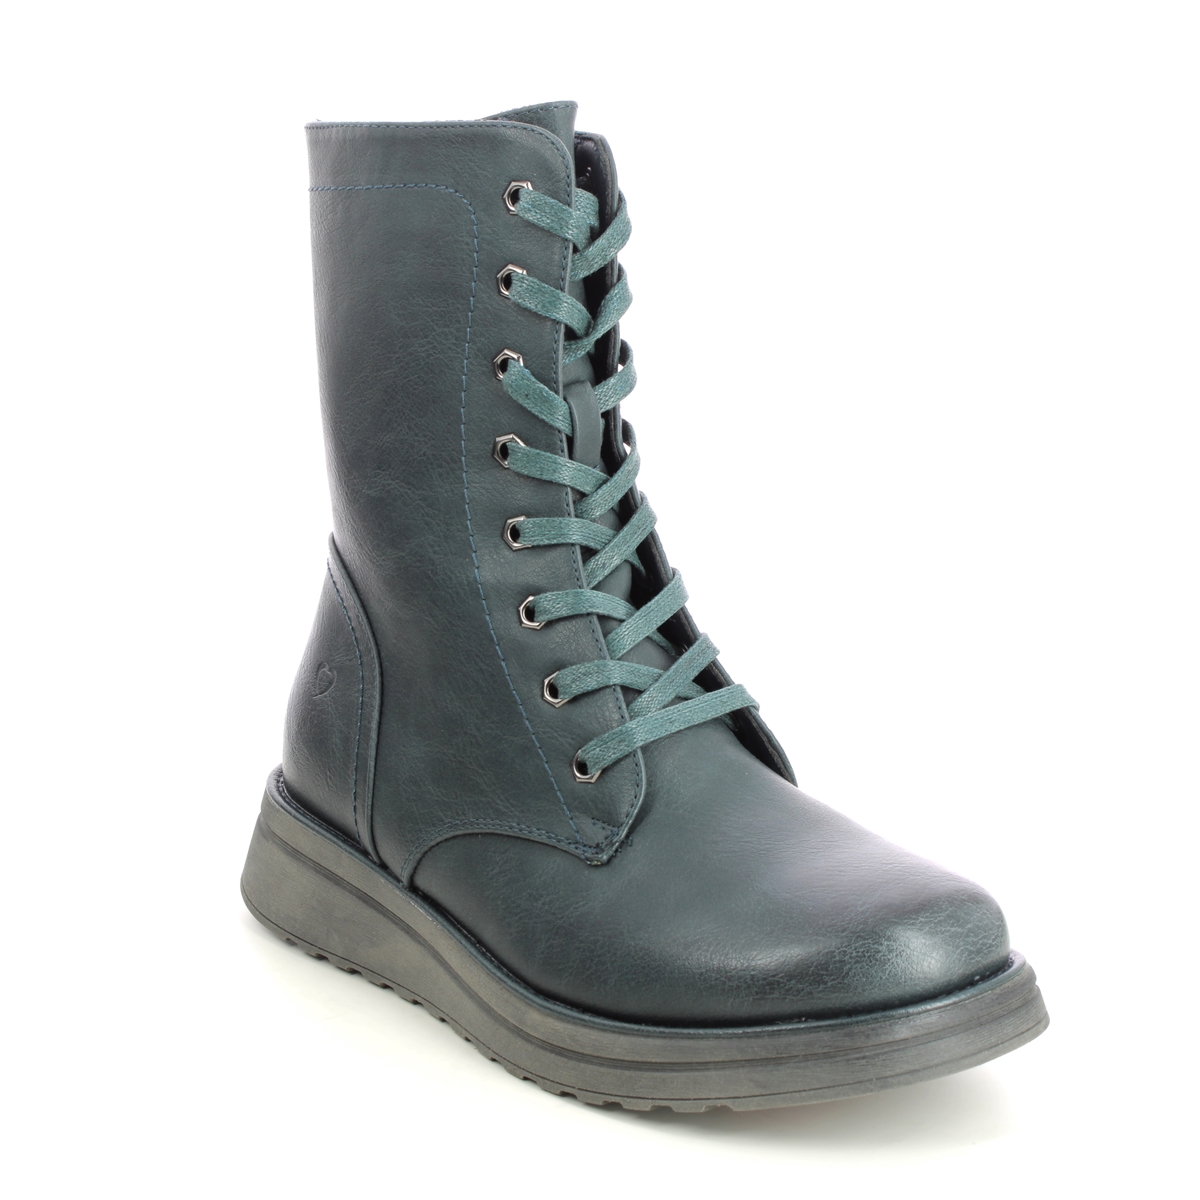 Heavenly Feet Martina Walker Teal Blue Womens Lace Up Boots 3509-73 In Size 4 In Plain Teal Blue